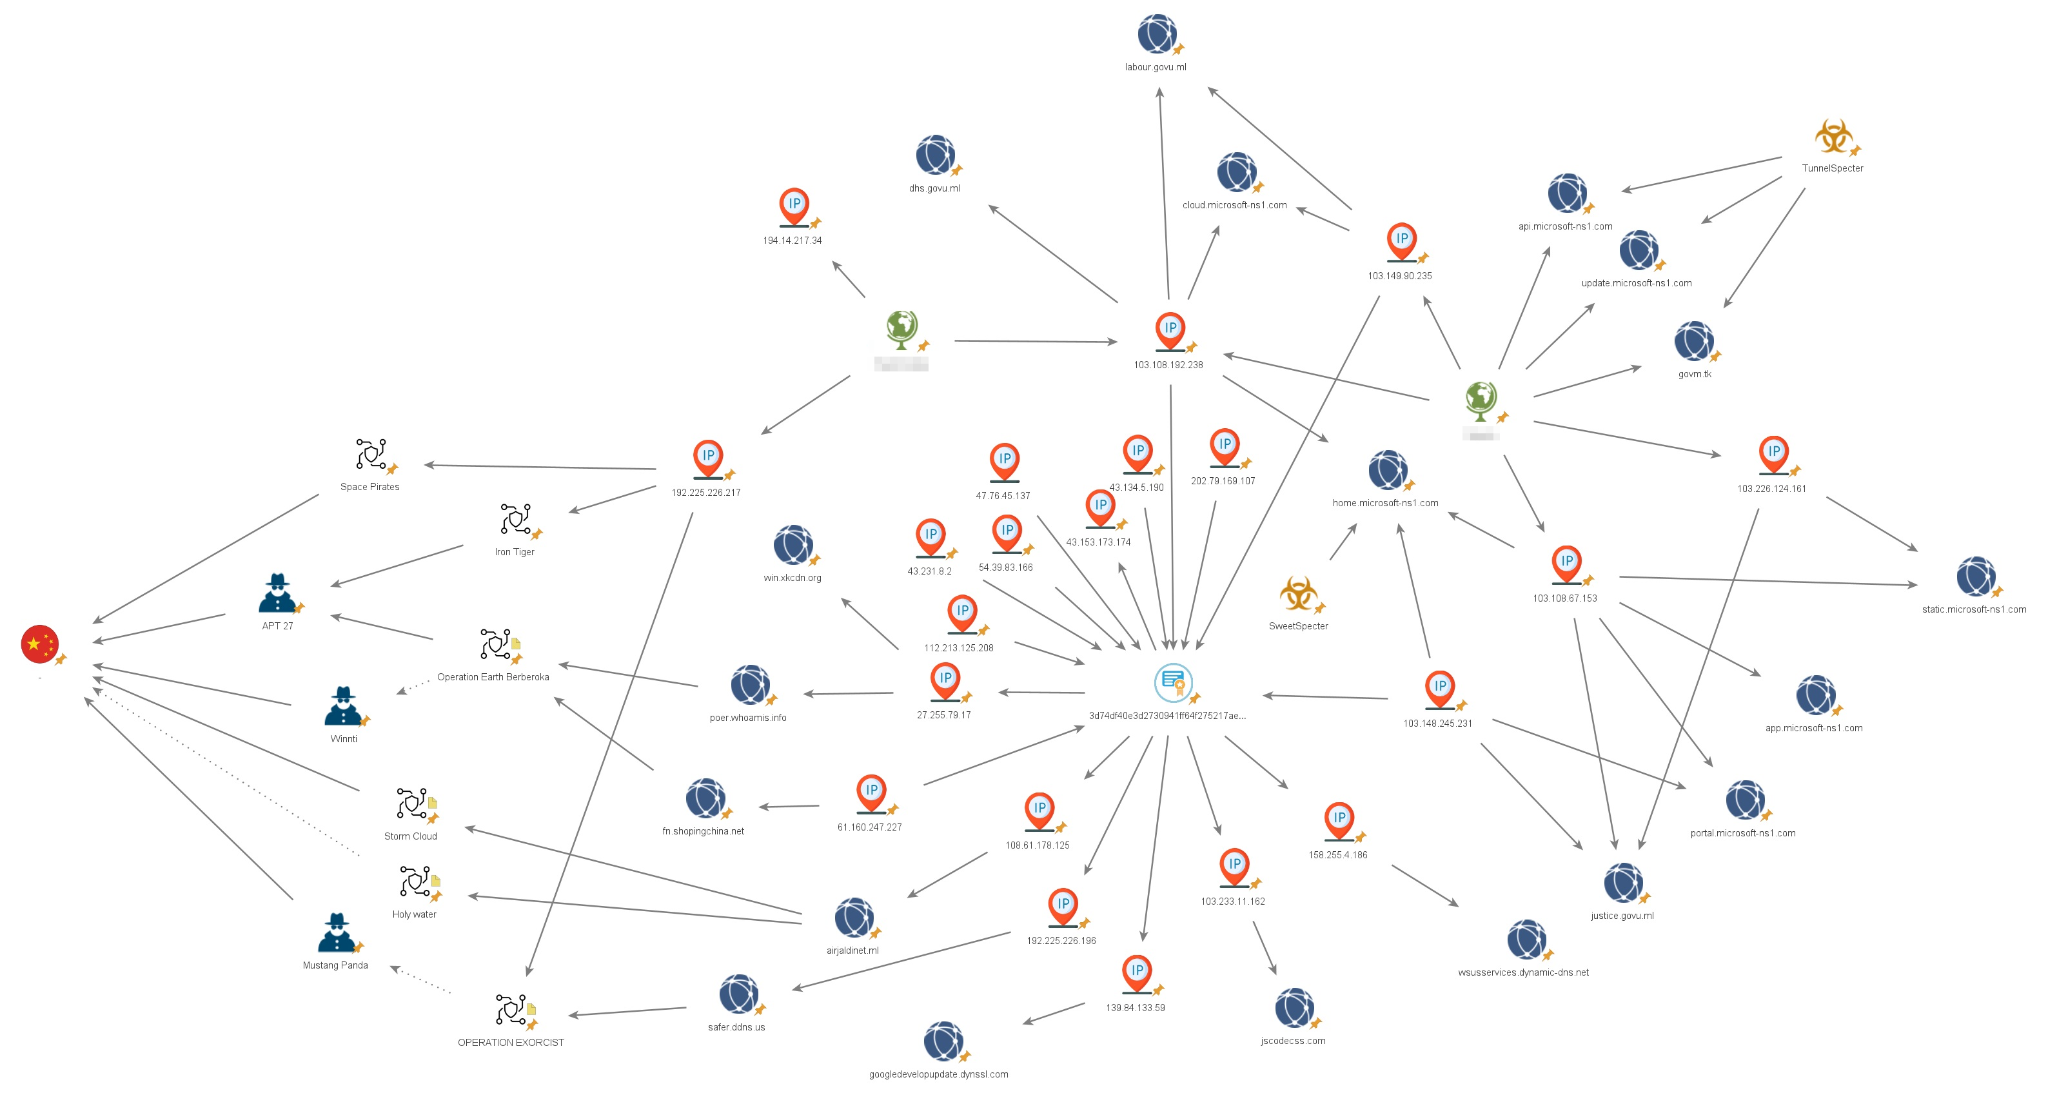 Image 14 is a Maltego graph tracking the infrastructure. A mix of icons denote the IP addresses, domains and subdomains, and other parts of their network. 